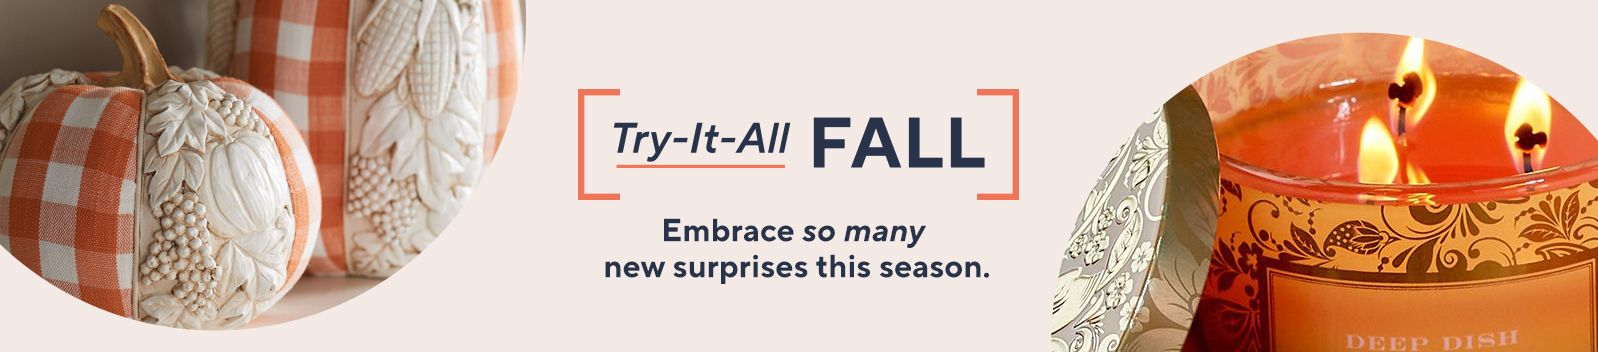 Try-It-All Fall. Embrace the unexpected.